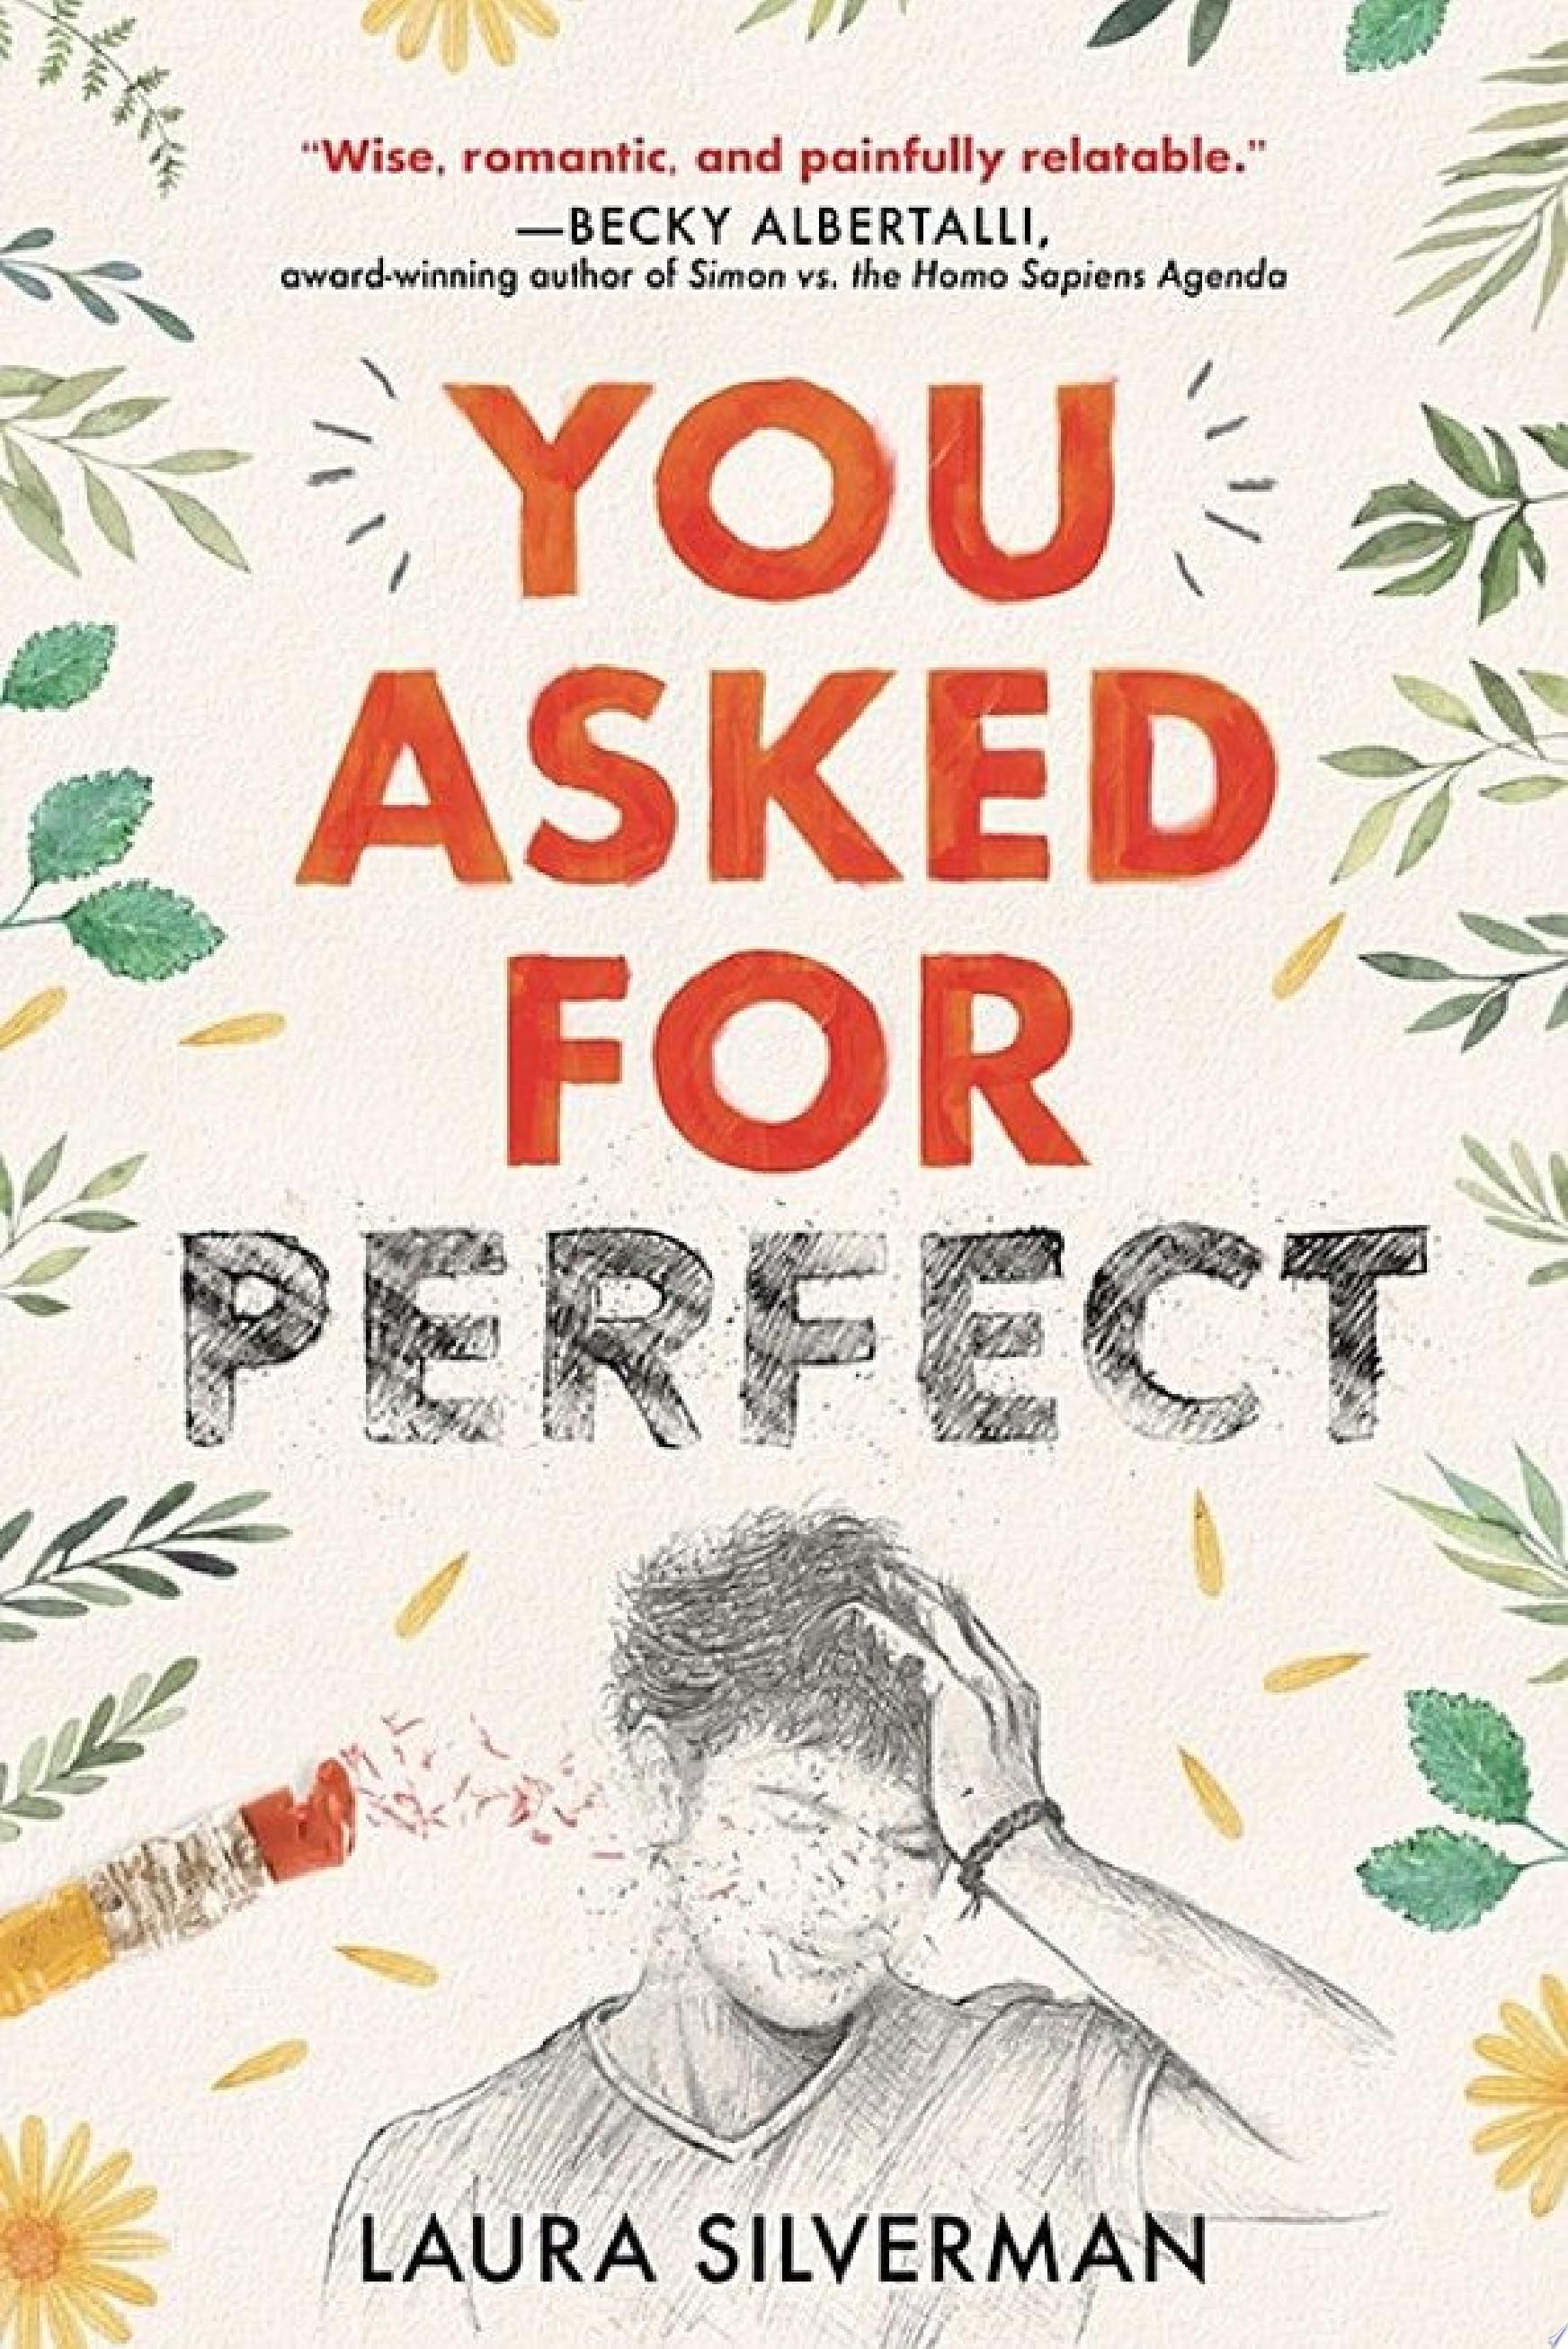 Image for "You Asked for Perfect"